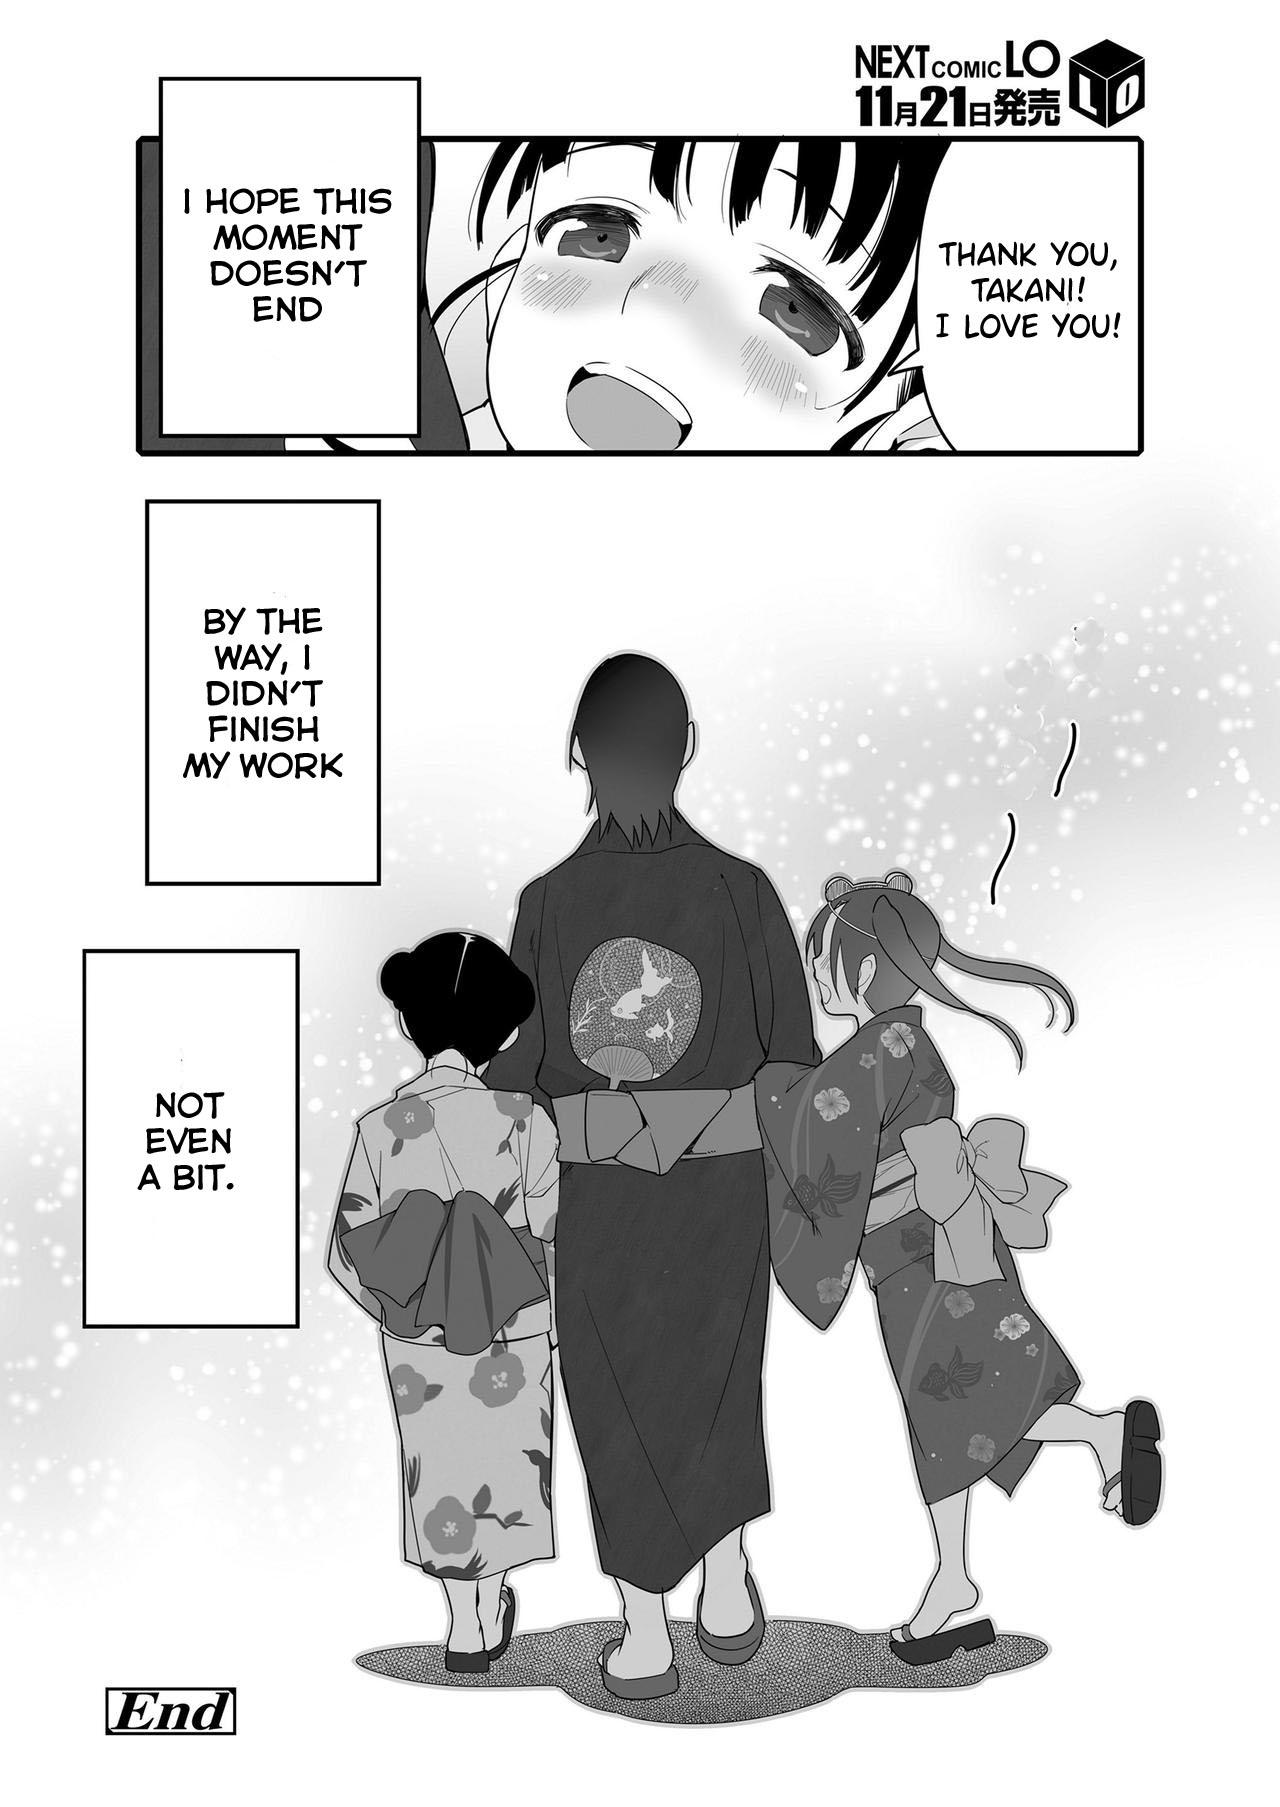 Babysitter Uchiage Hanabi, Ane to Miruka? Imouto to Miruka? | Fireworks, Should we see it with the elder sister or the younger sister? Whooty - Page 24